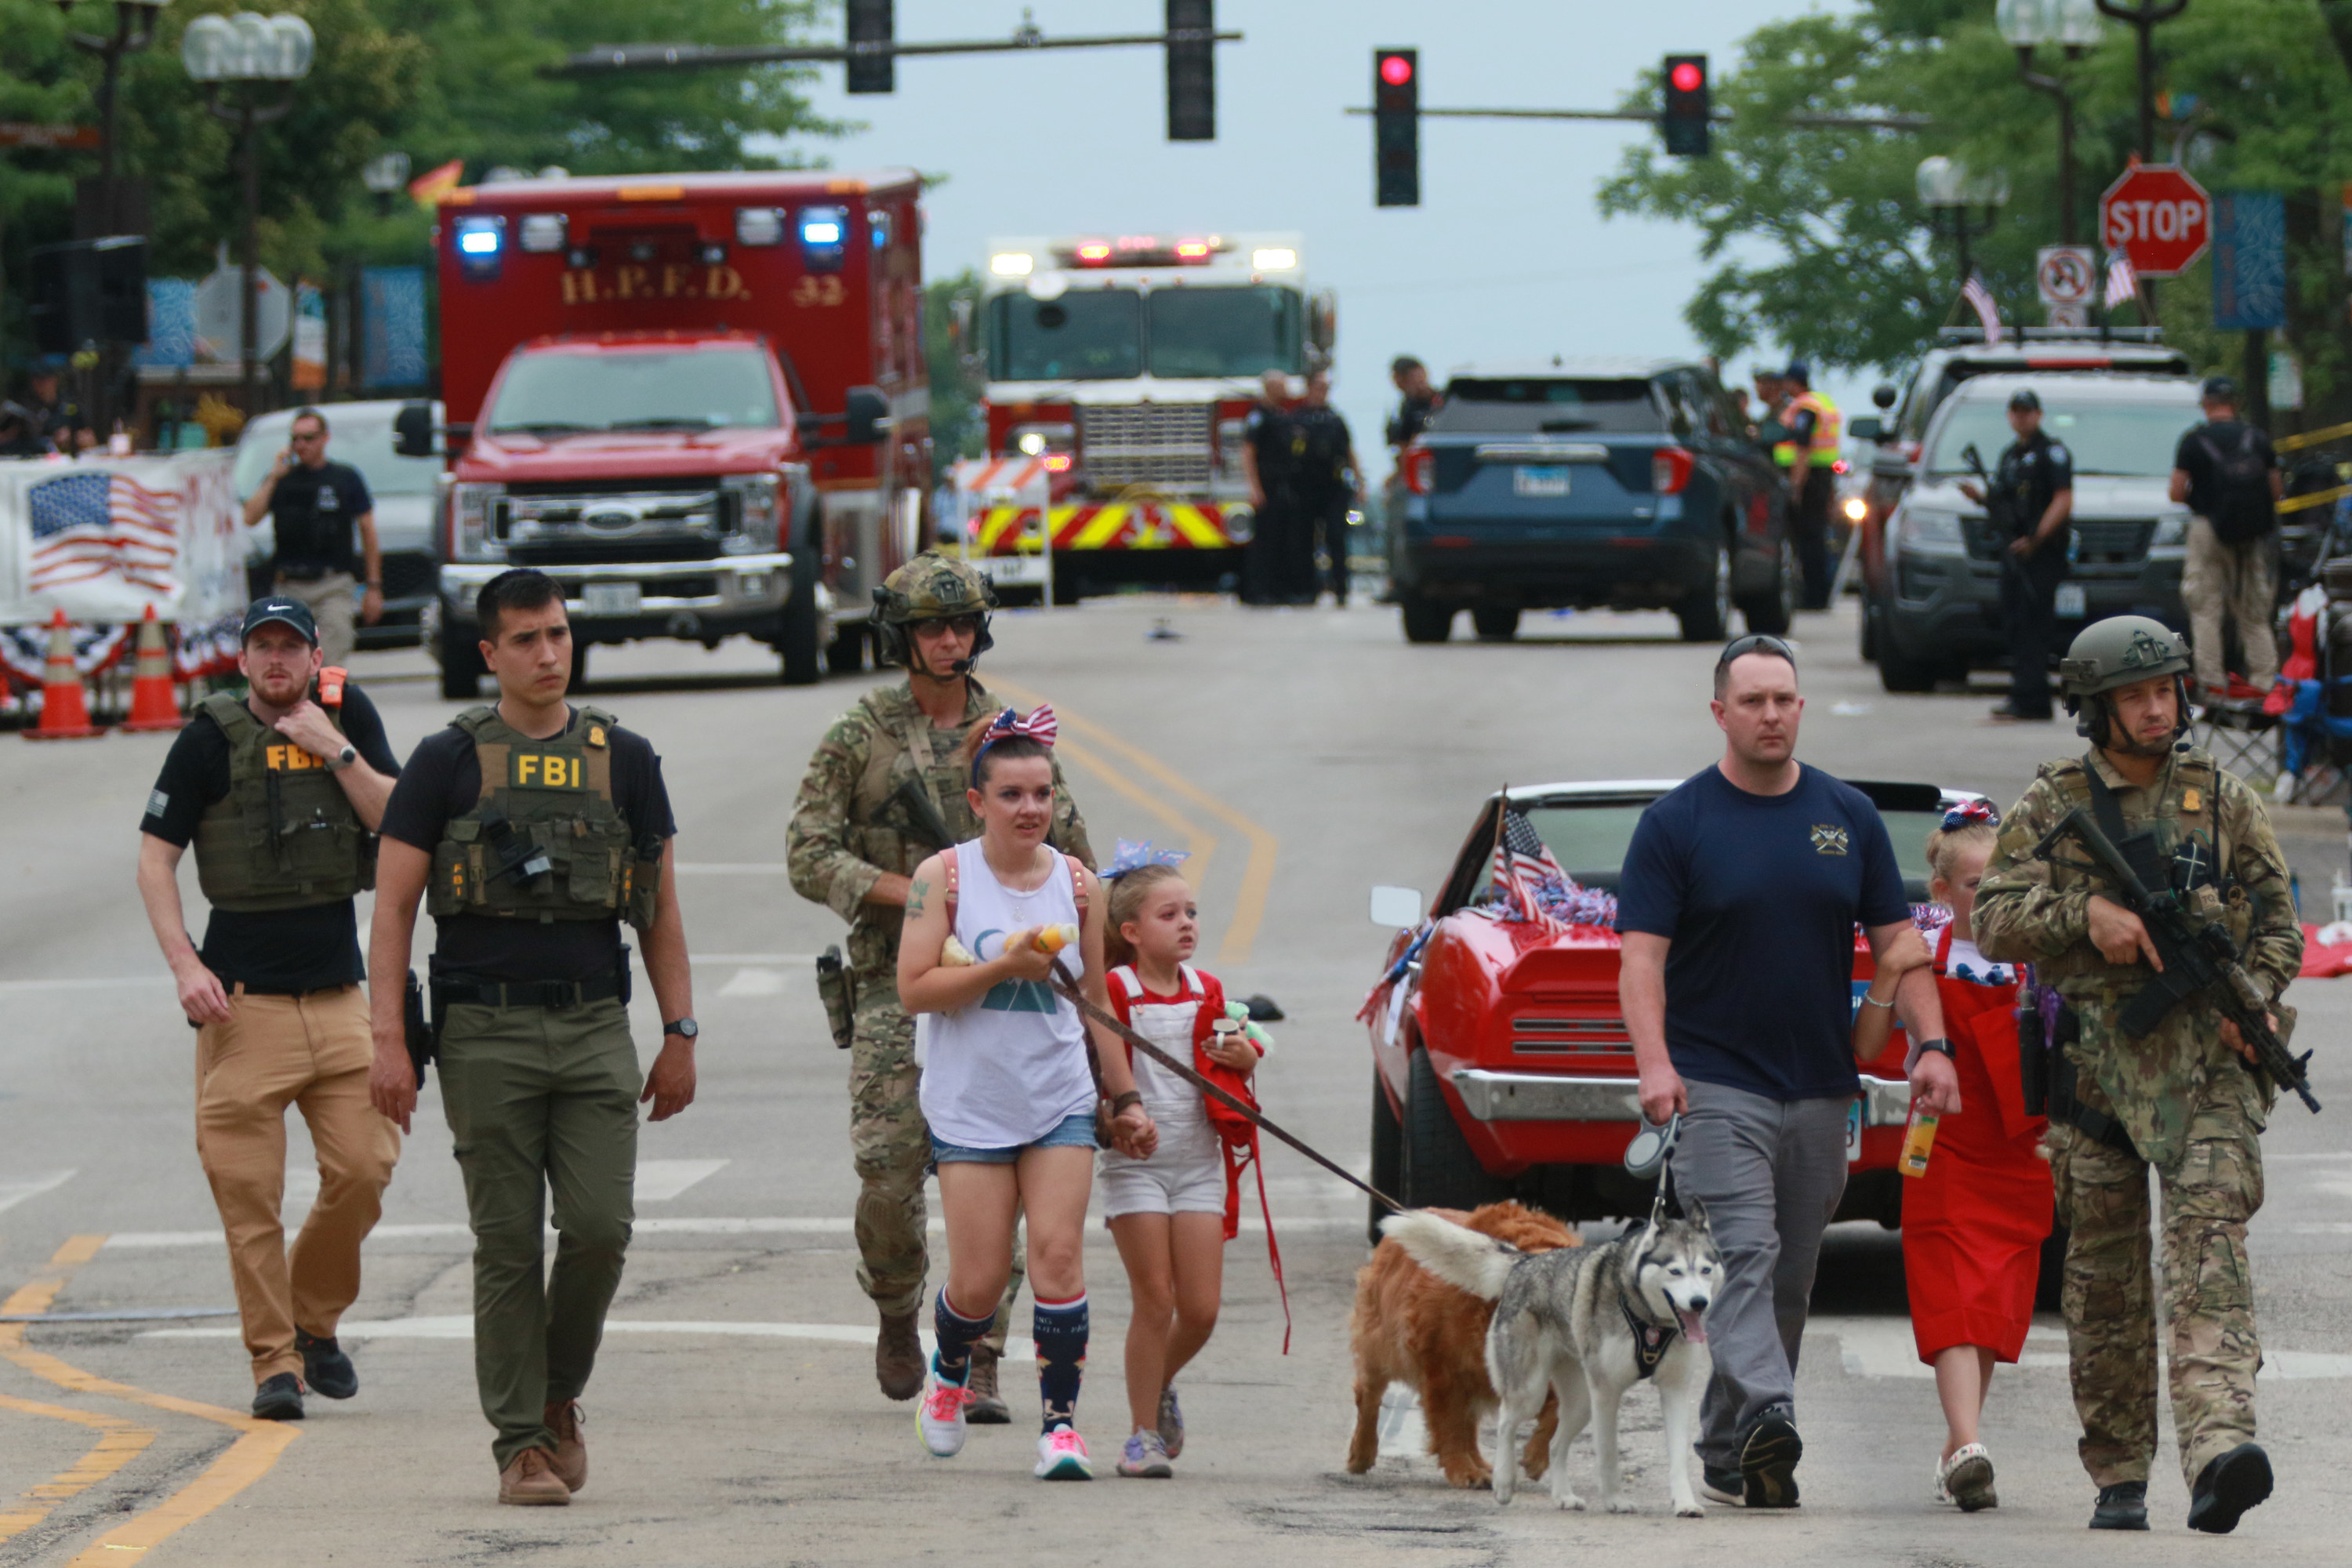 Law enforcement escorts a family away from the scene of a shooting at a Fourth of July parade on July 4, 2022 in Highland Park, Illinois.